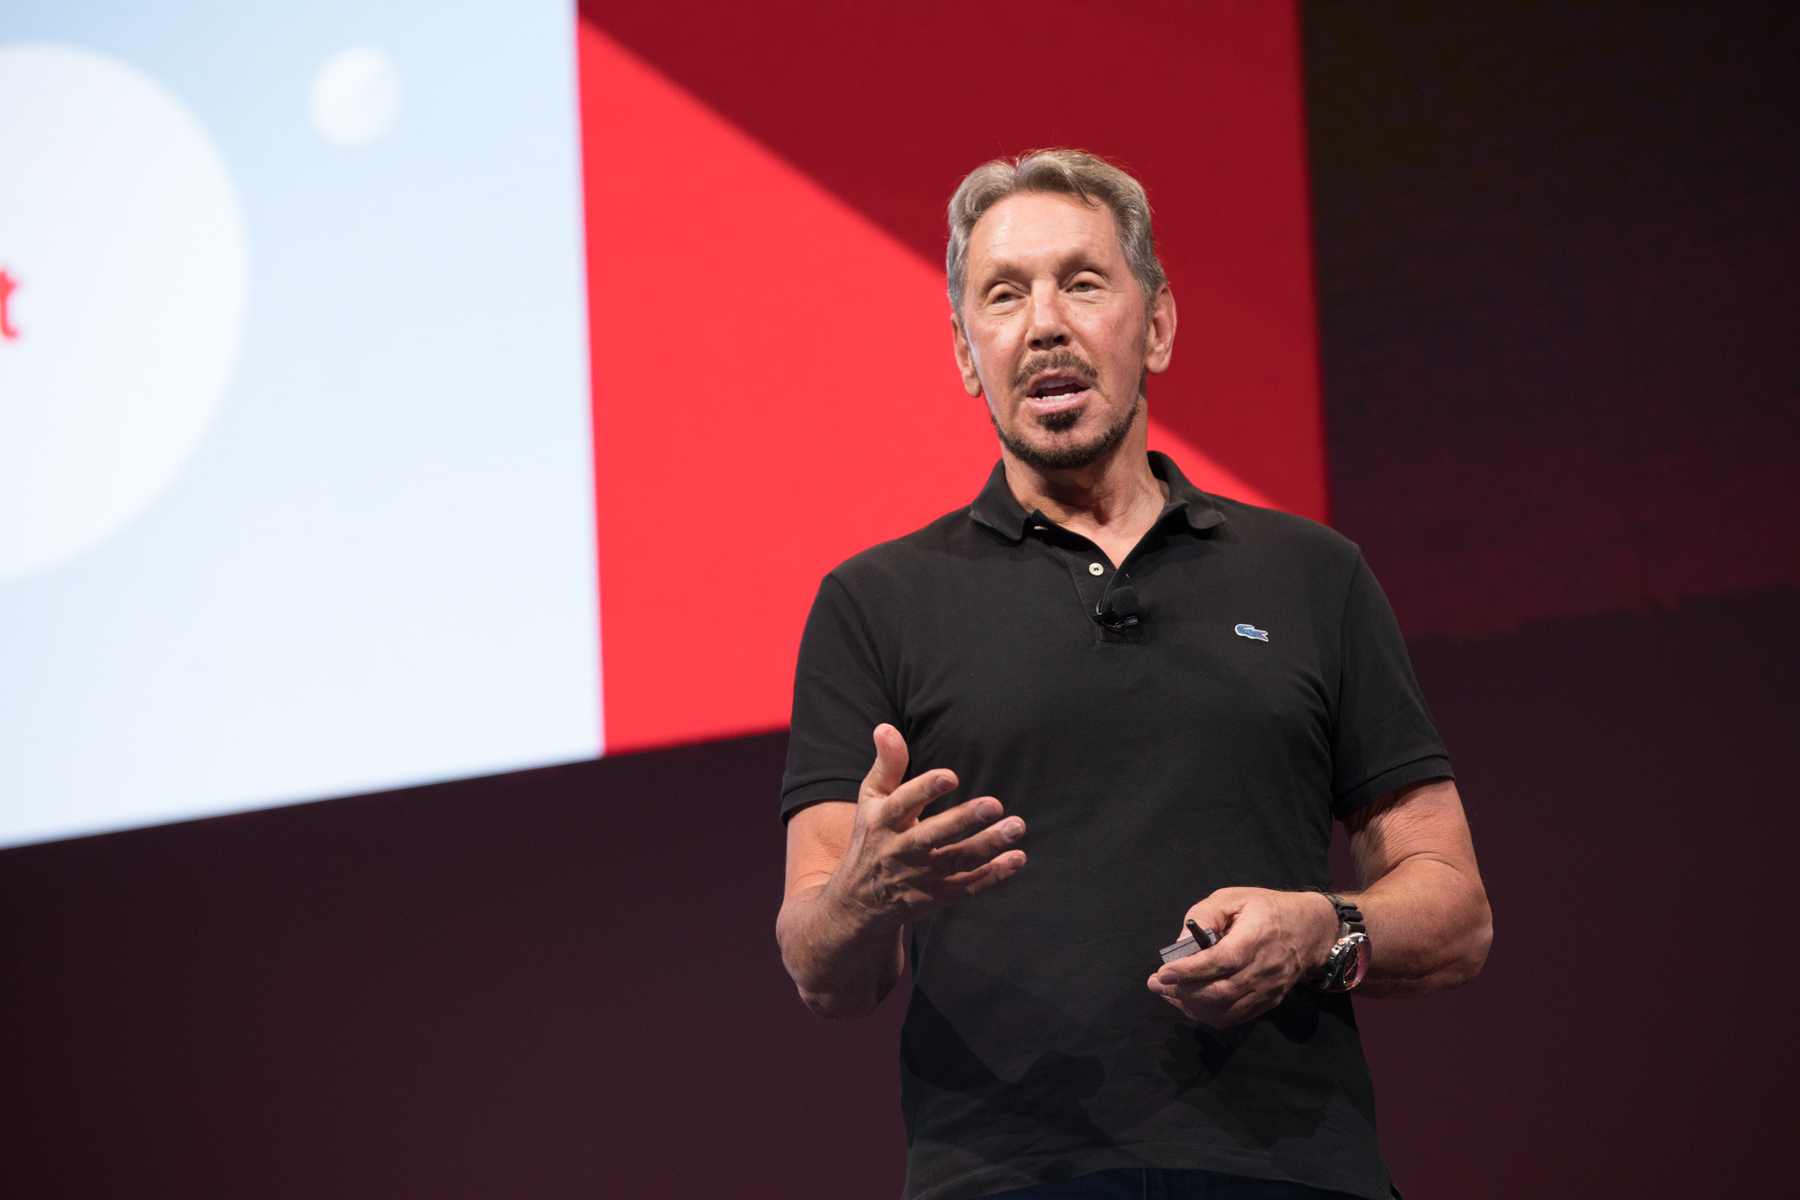 Kosmos welcomes Larry Ellison as an investor to its Davis Cup reform project